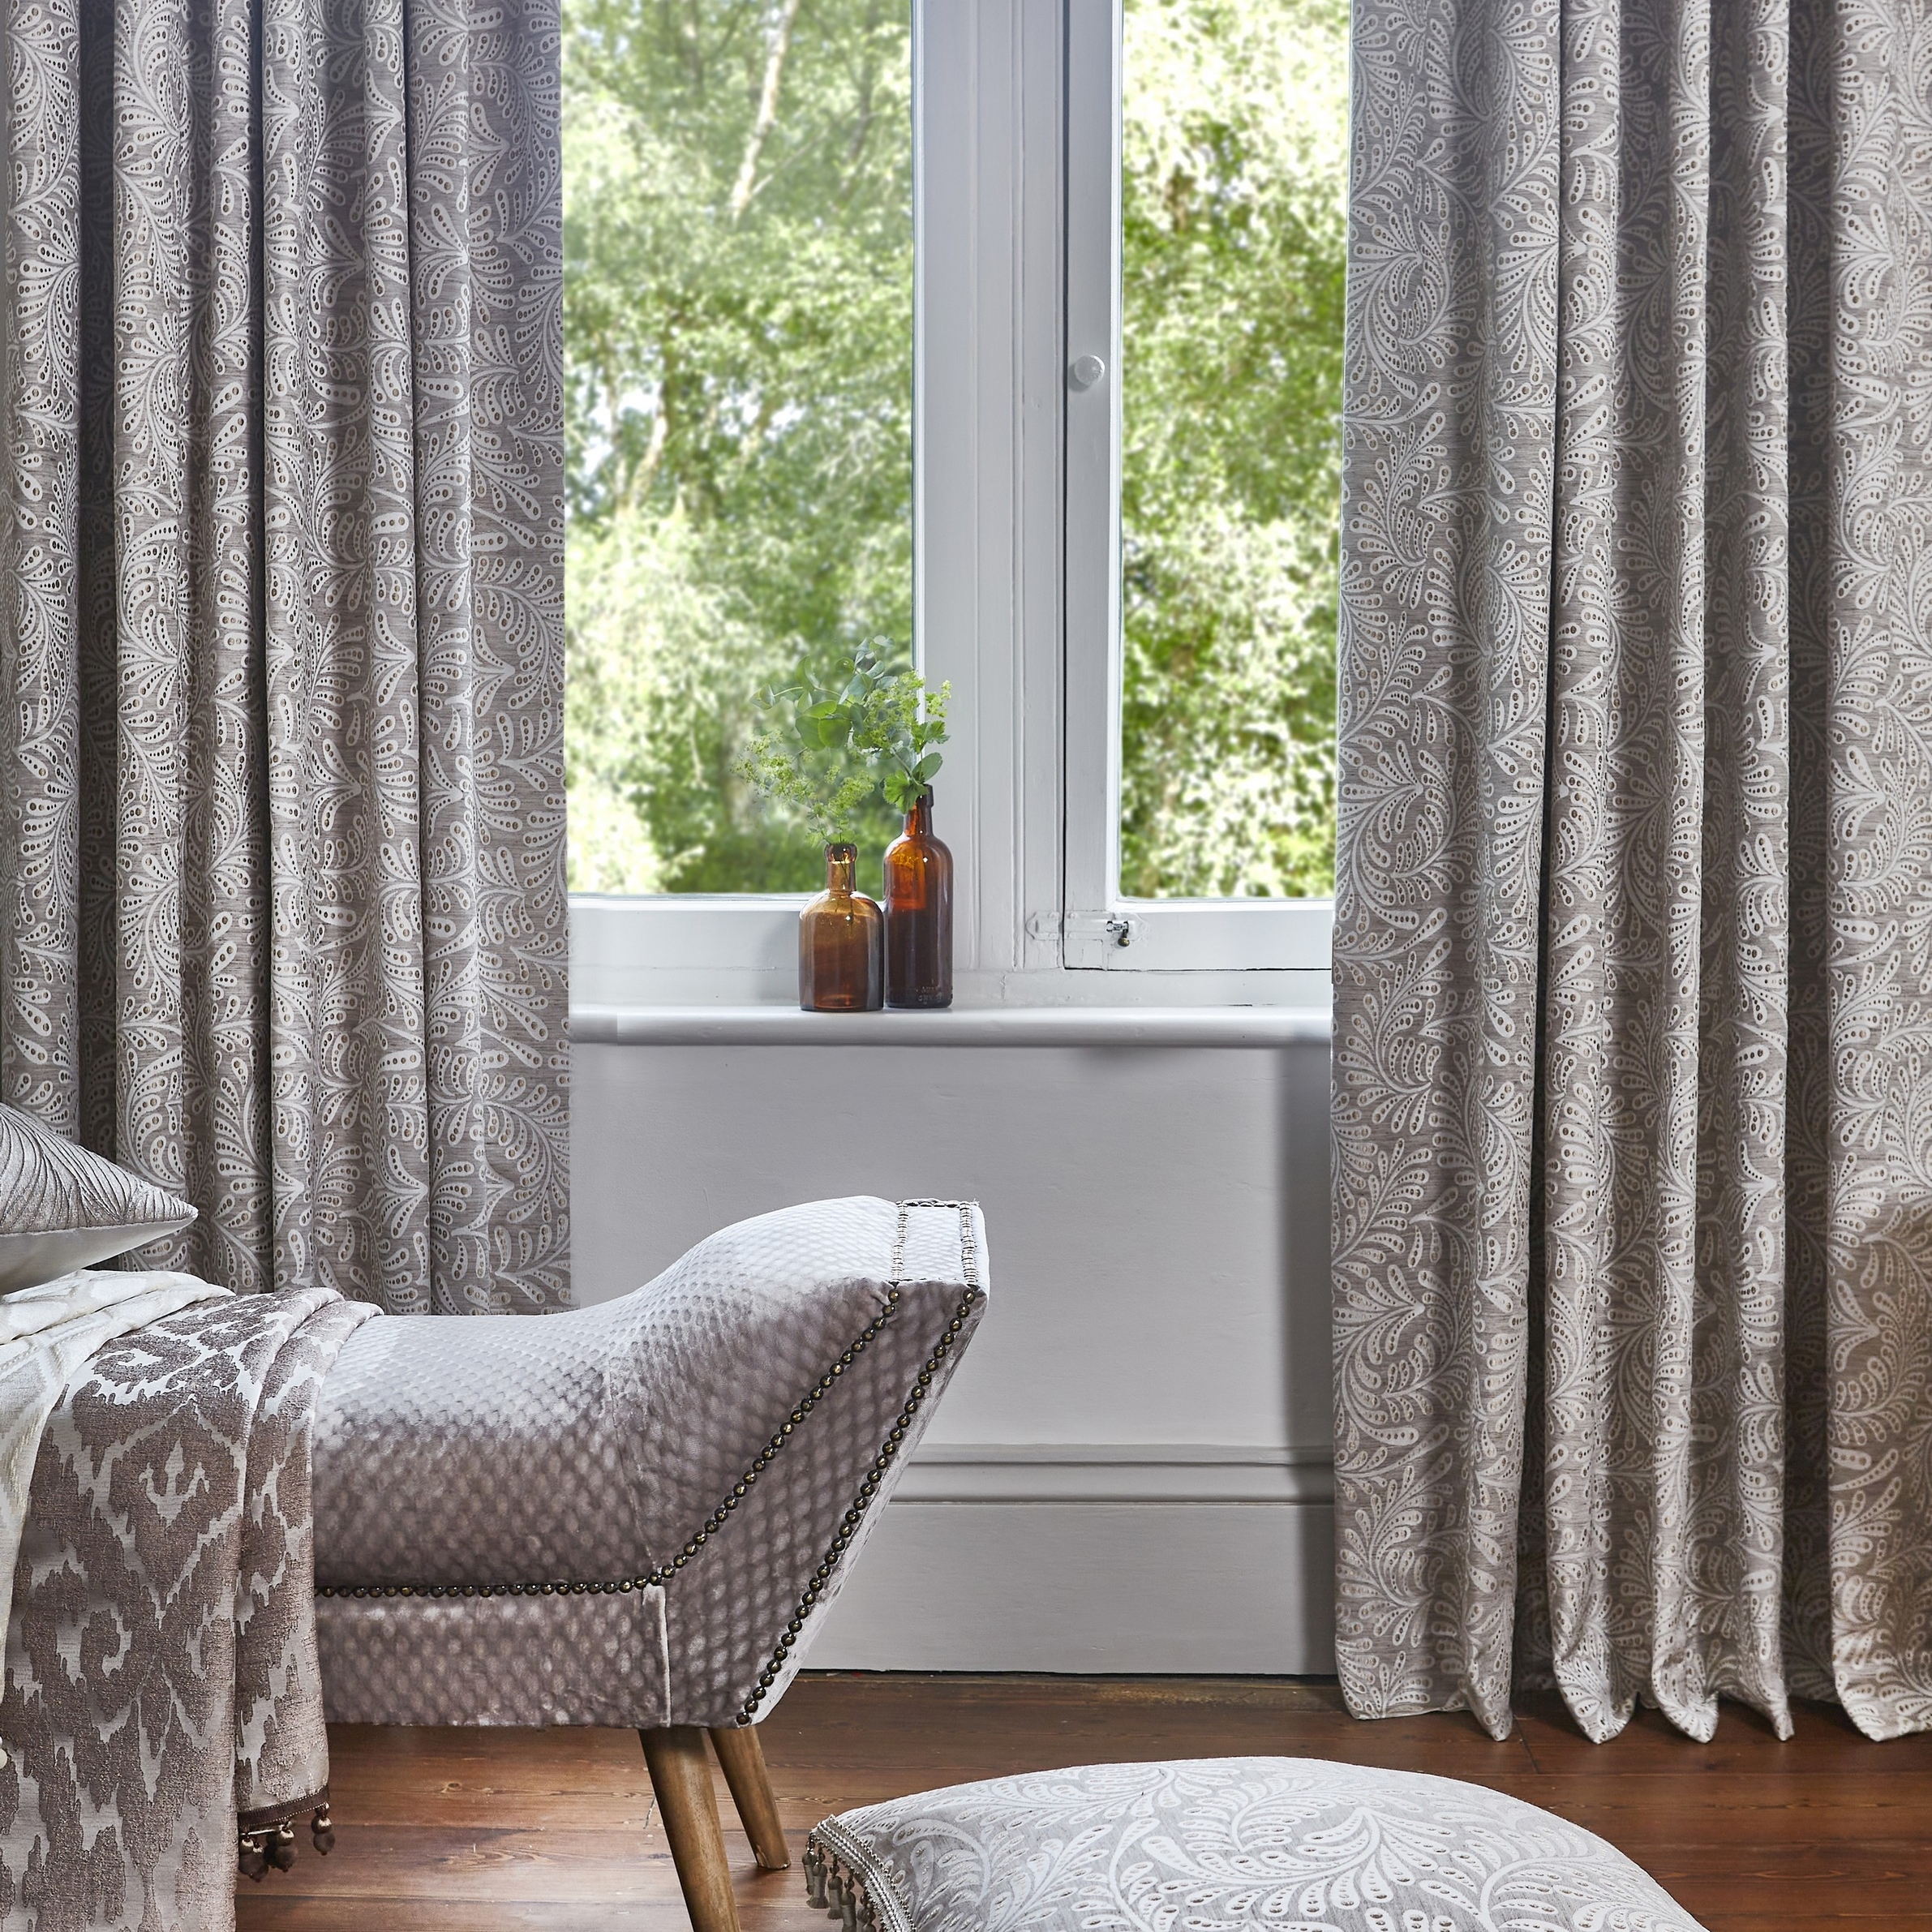 9. Library Custom Made Curtains - Eclipse Cinder